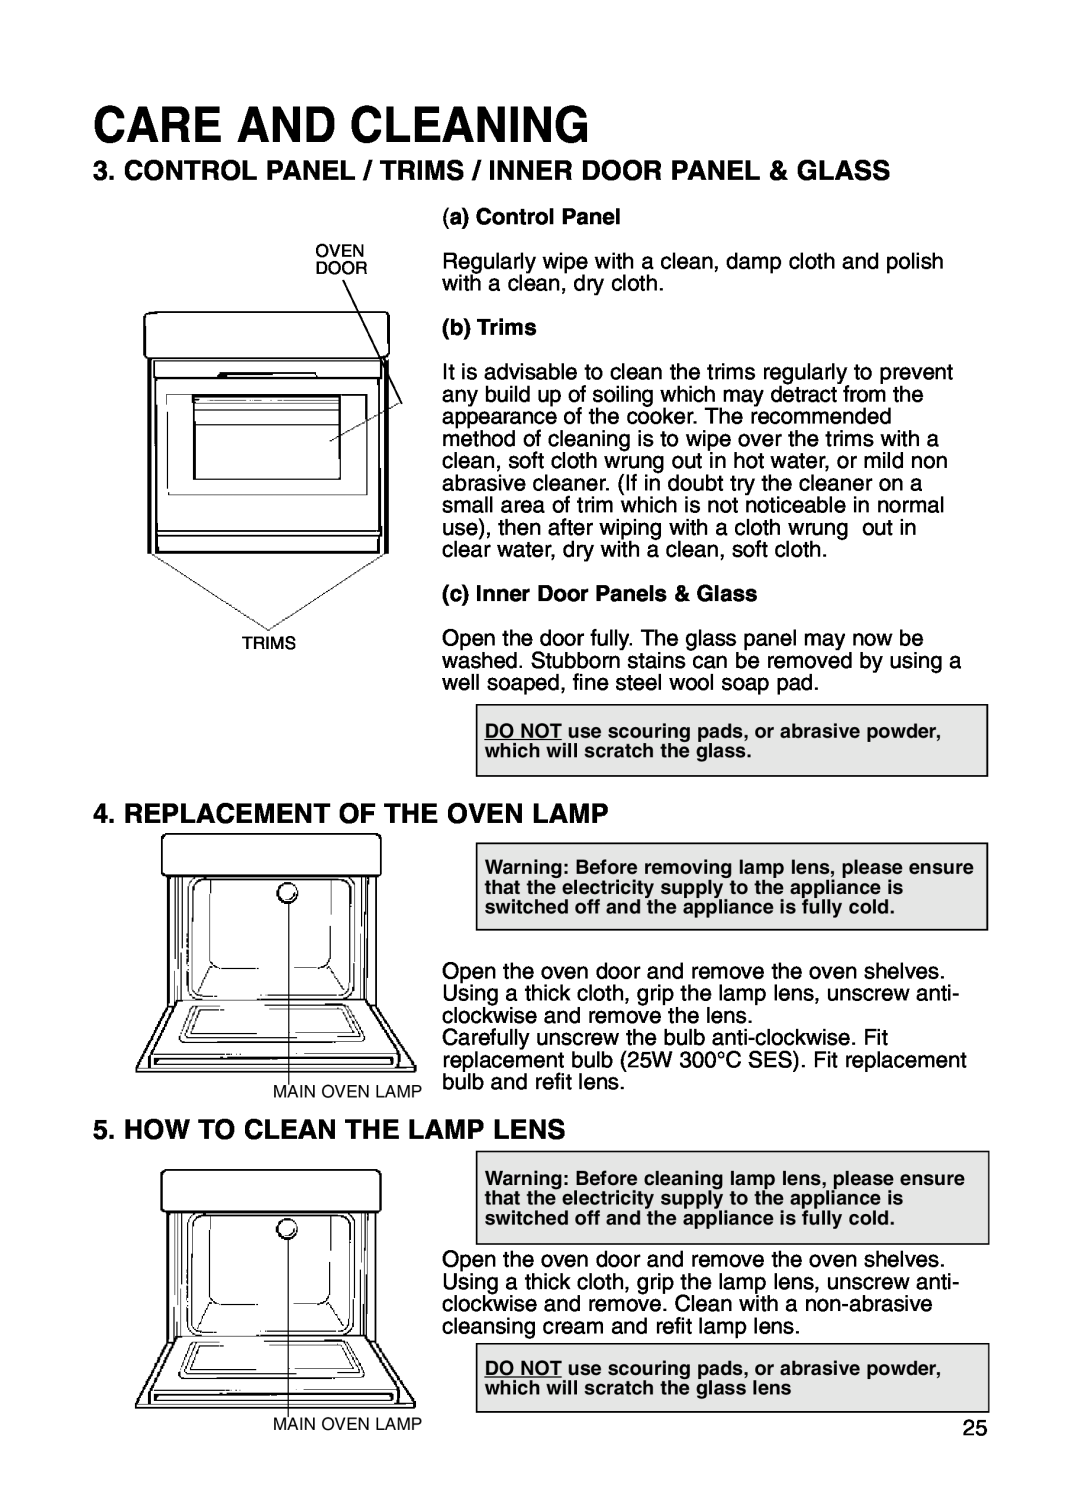 Hotpoint BS41X manual Care And Cleaning, Replacement Of The Oven Lamp, How To Clean The Lamp Lens, a Control Panel, b Trims 